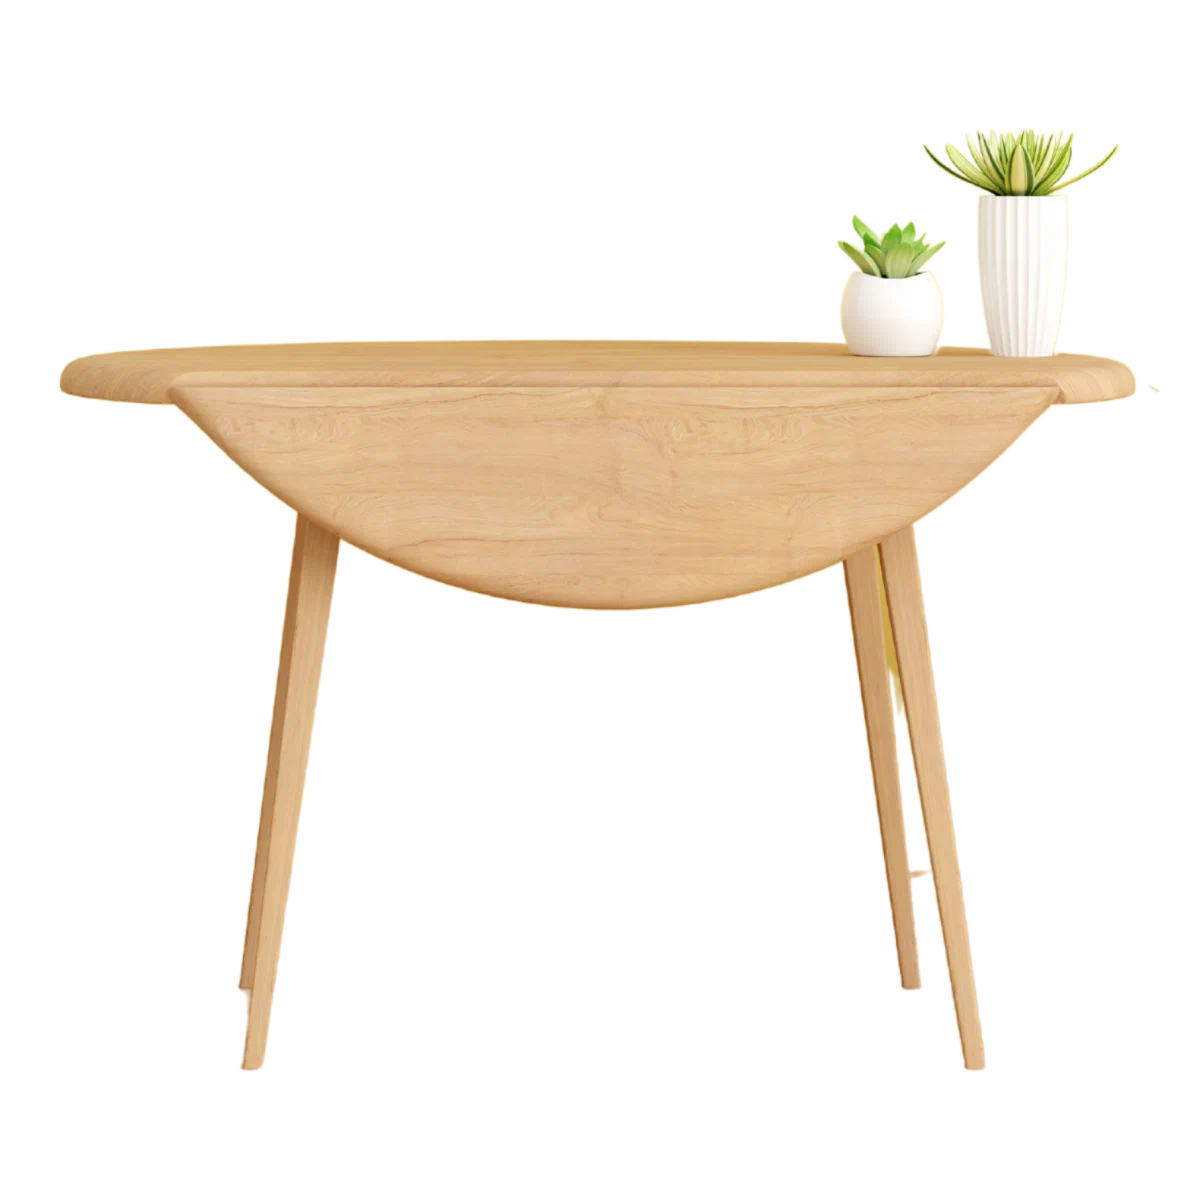 Wooden curved table